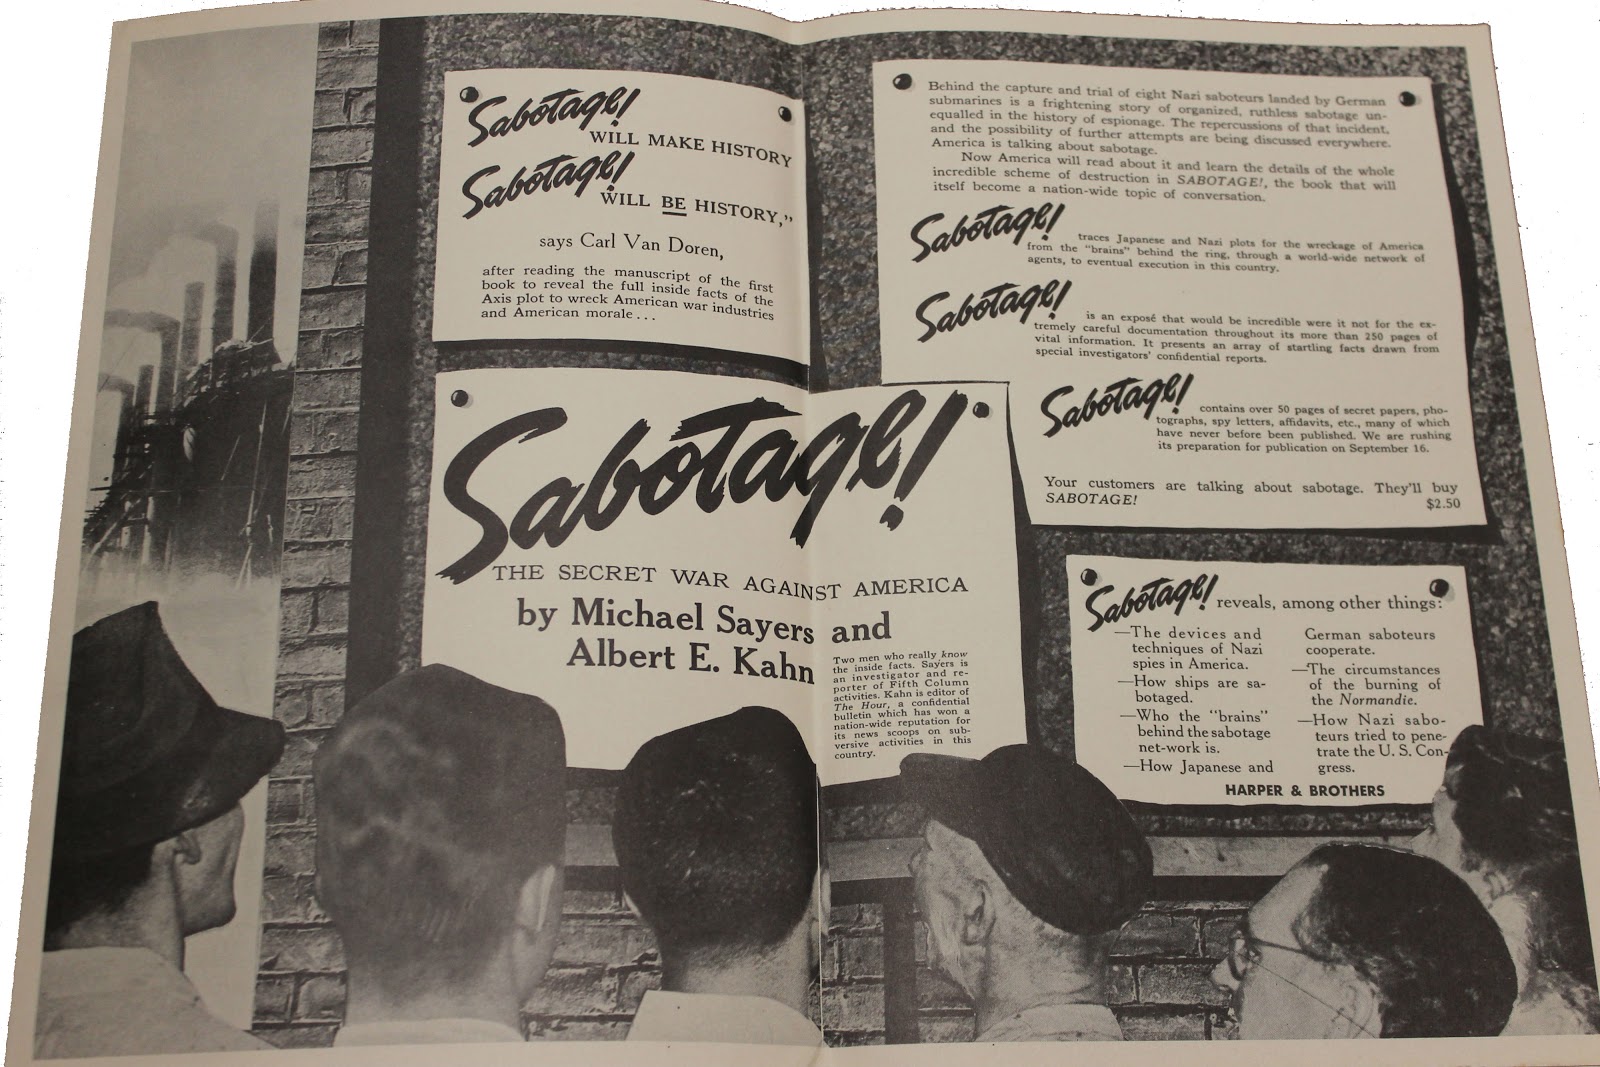 A folded full page promotional piece for Sabotag! showing a group of people gazing at a brick wall containing advertisements, reviews, testimonials and other promotional materials for Sabotage. In the distance is a factory.